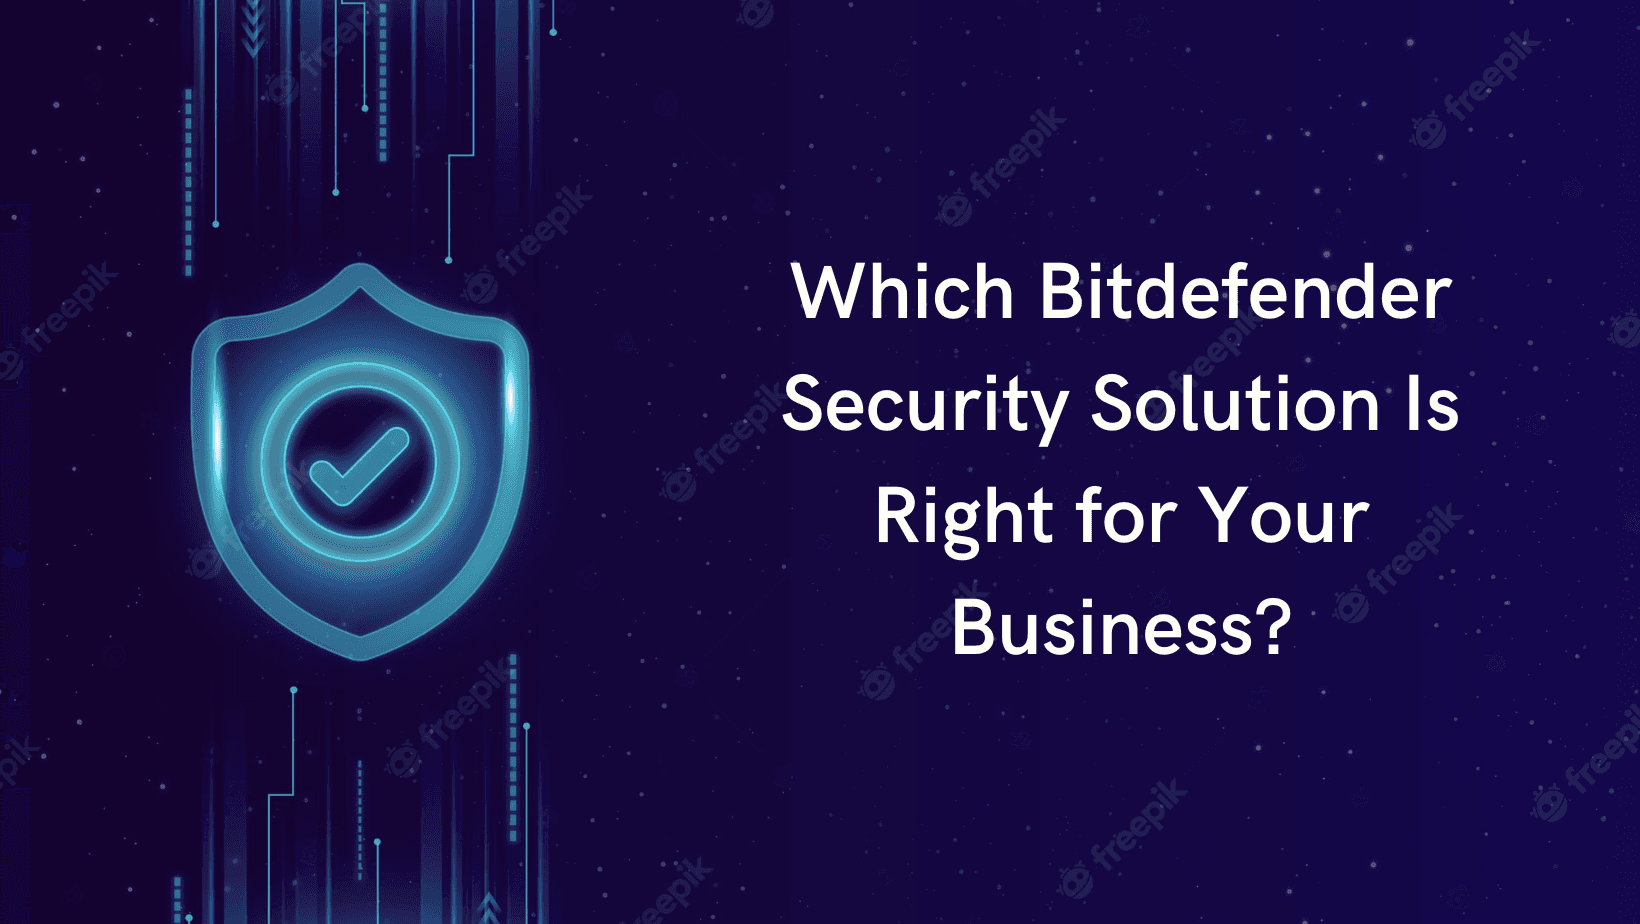 Product Which Bitdefender Security Solution Suits Your Business? image